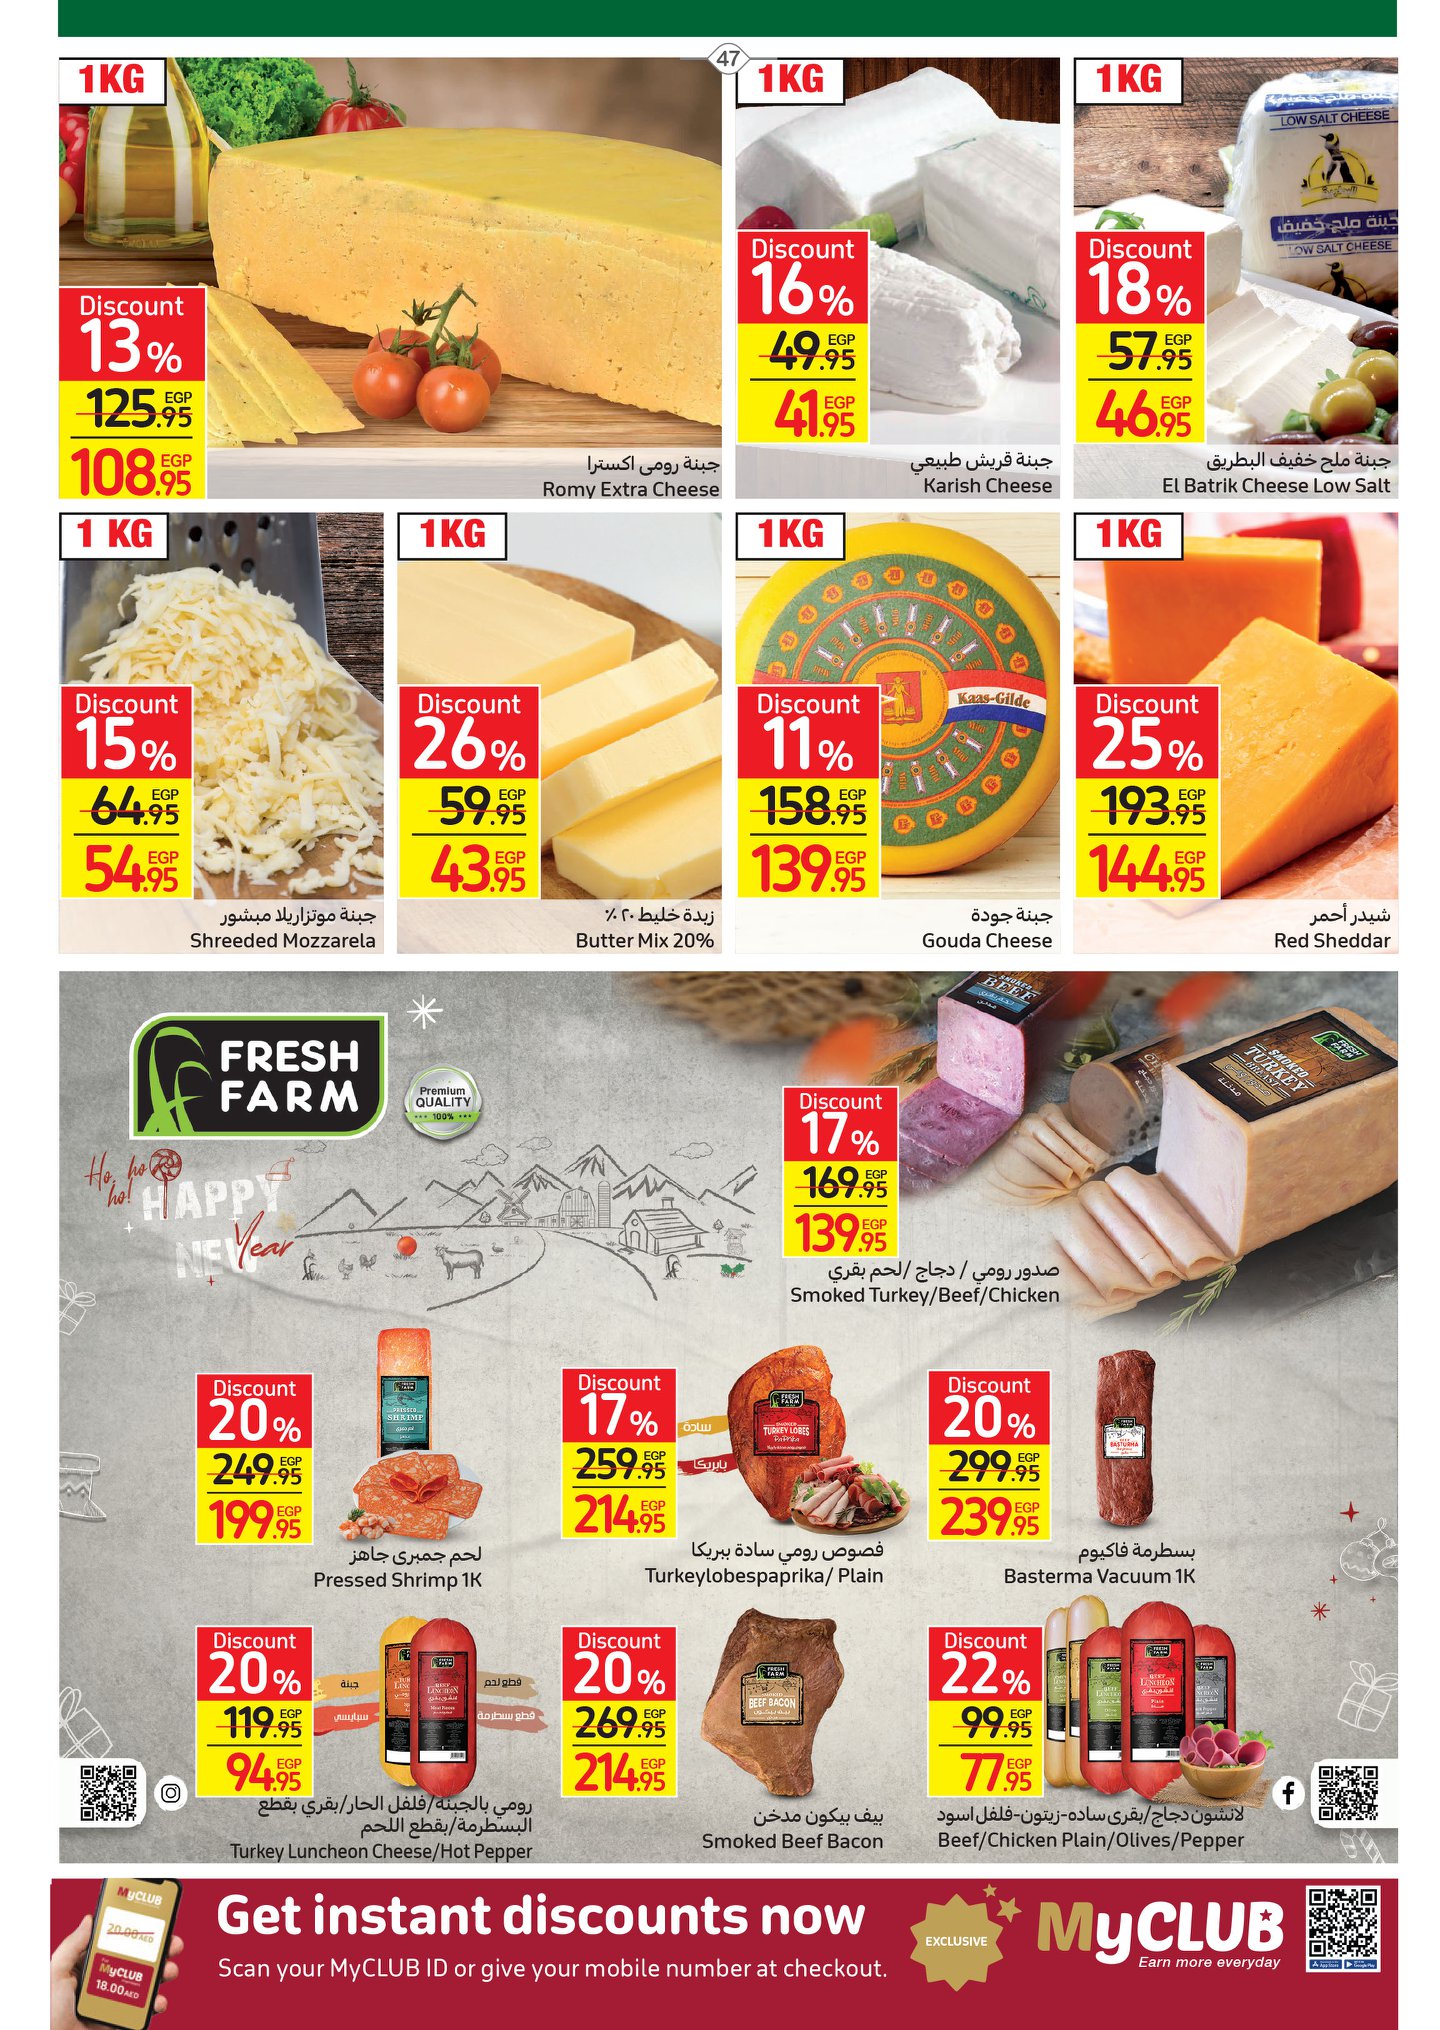 Carrefour magazine offers complete with 50% discounts and a surprise purchase in convenient installments without interest 53